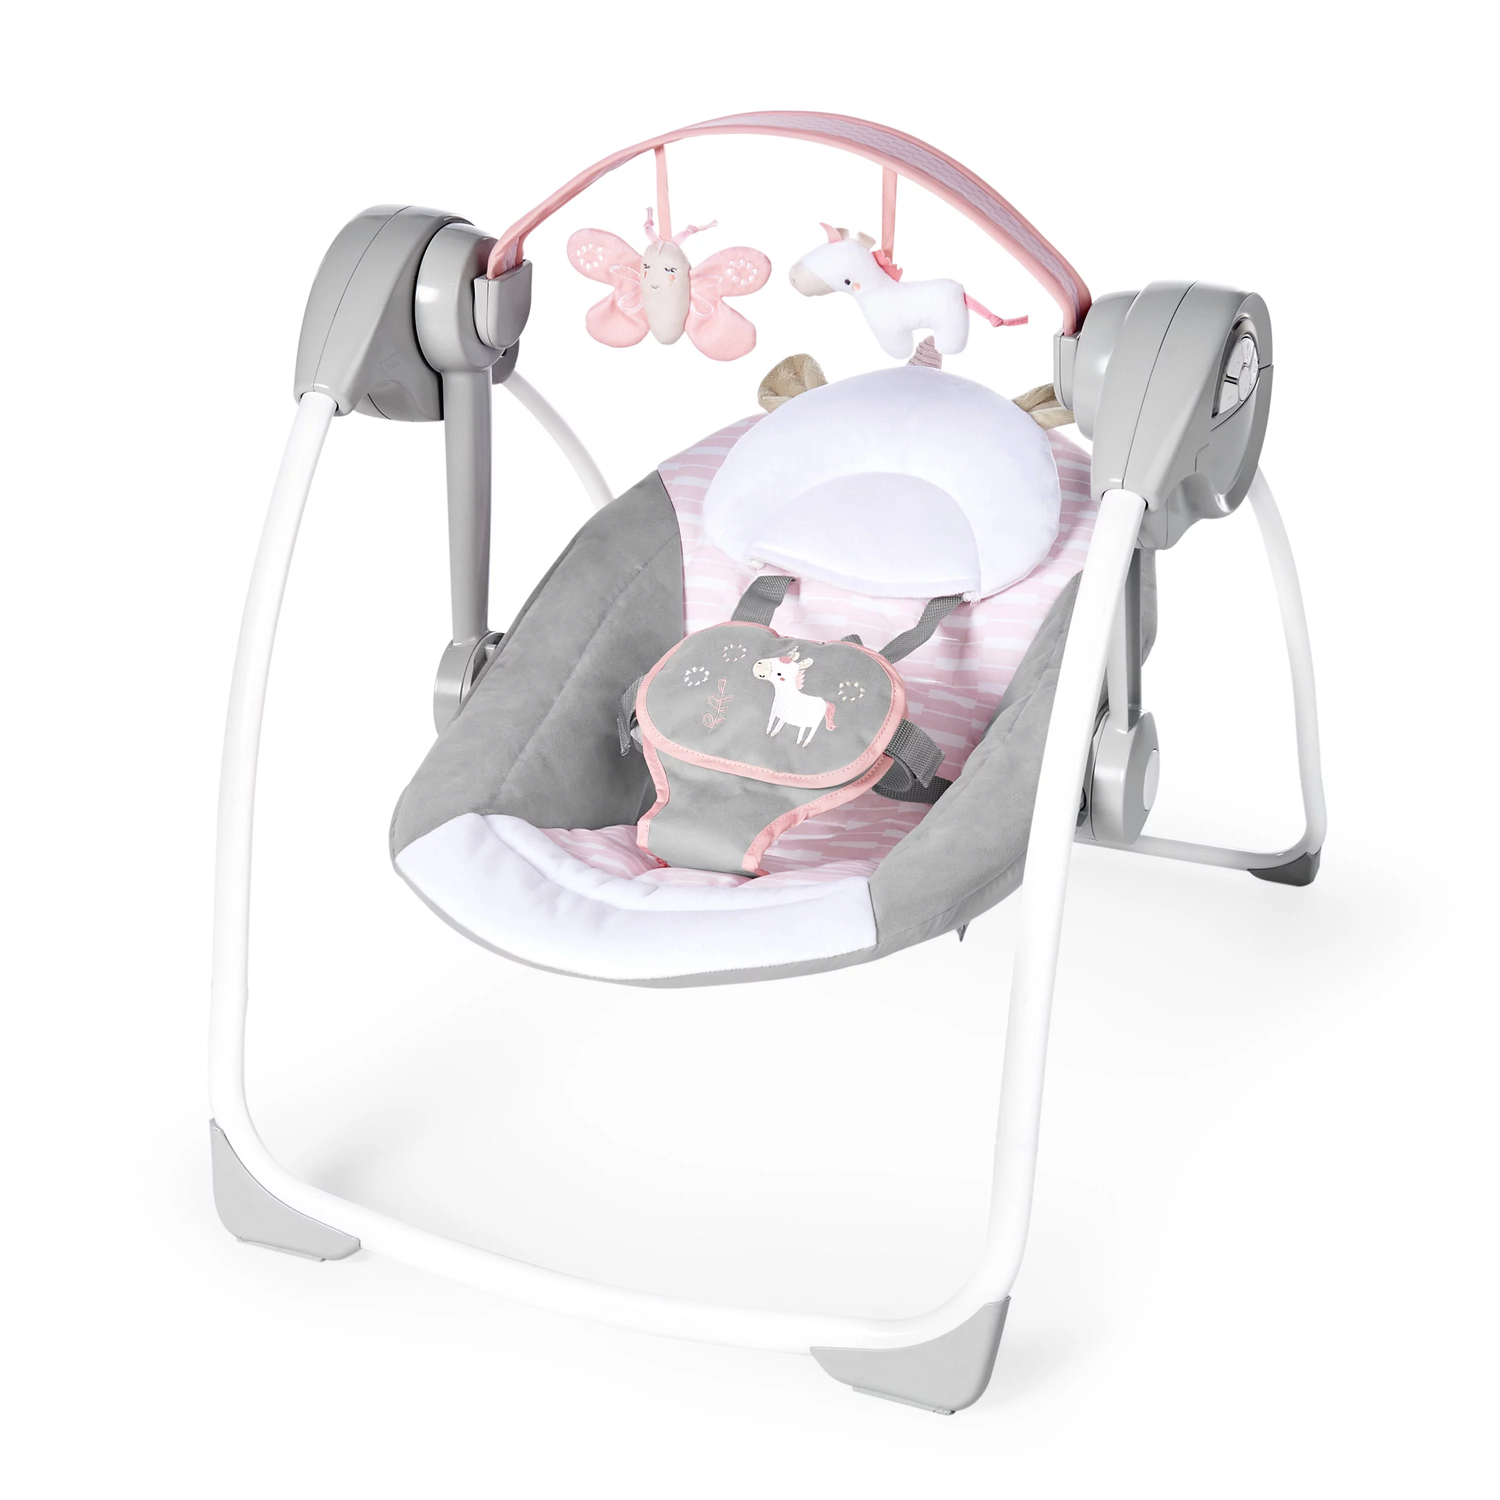 Baby Bouncer Swing All items in the store Ranking TOP16 Seat Rocker Infan W Sounds Portable Electric